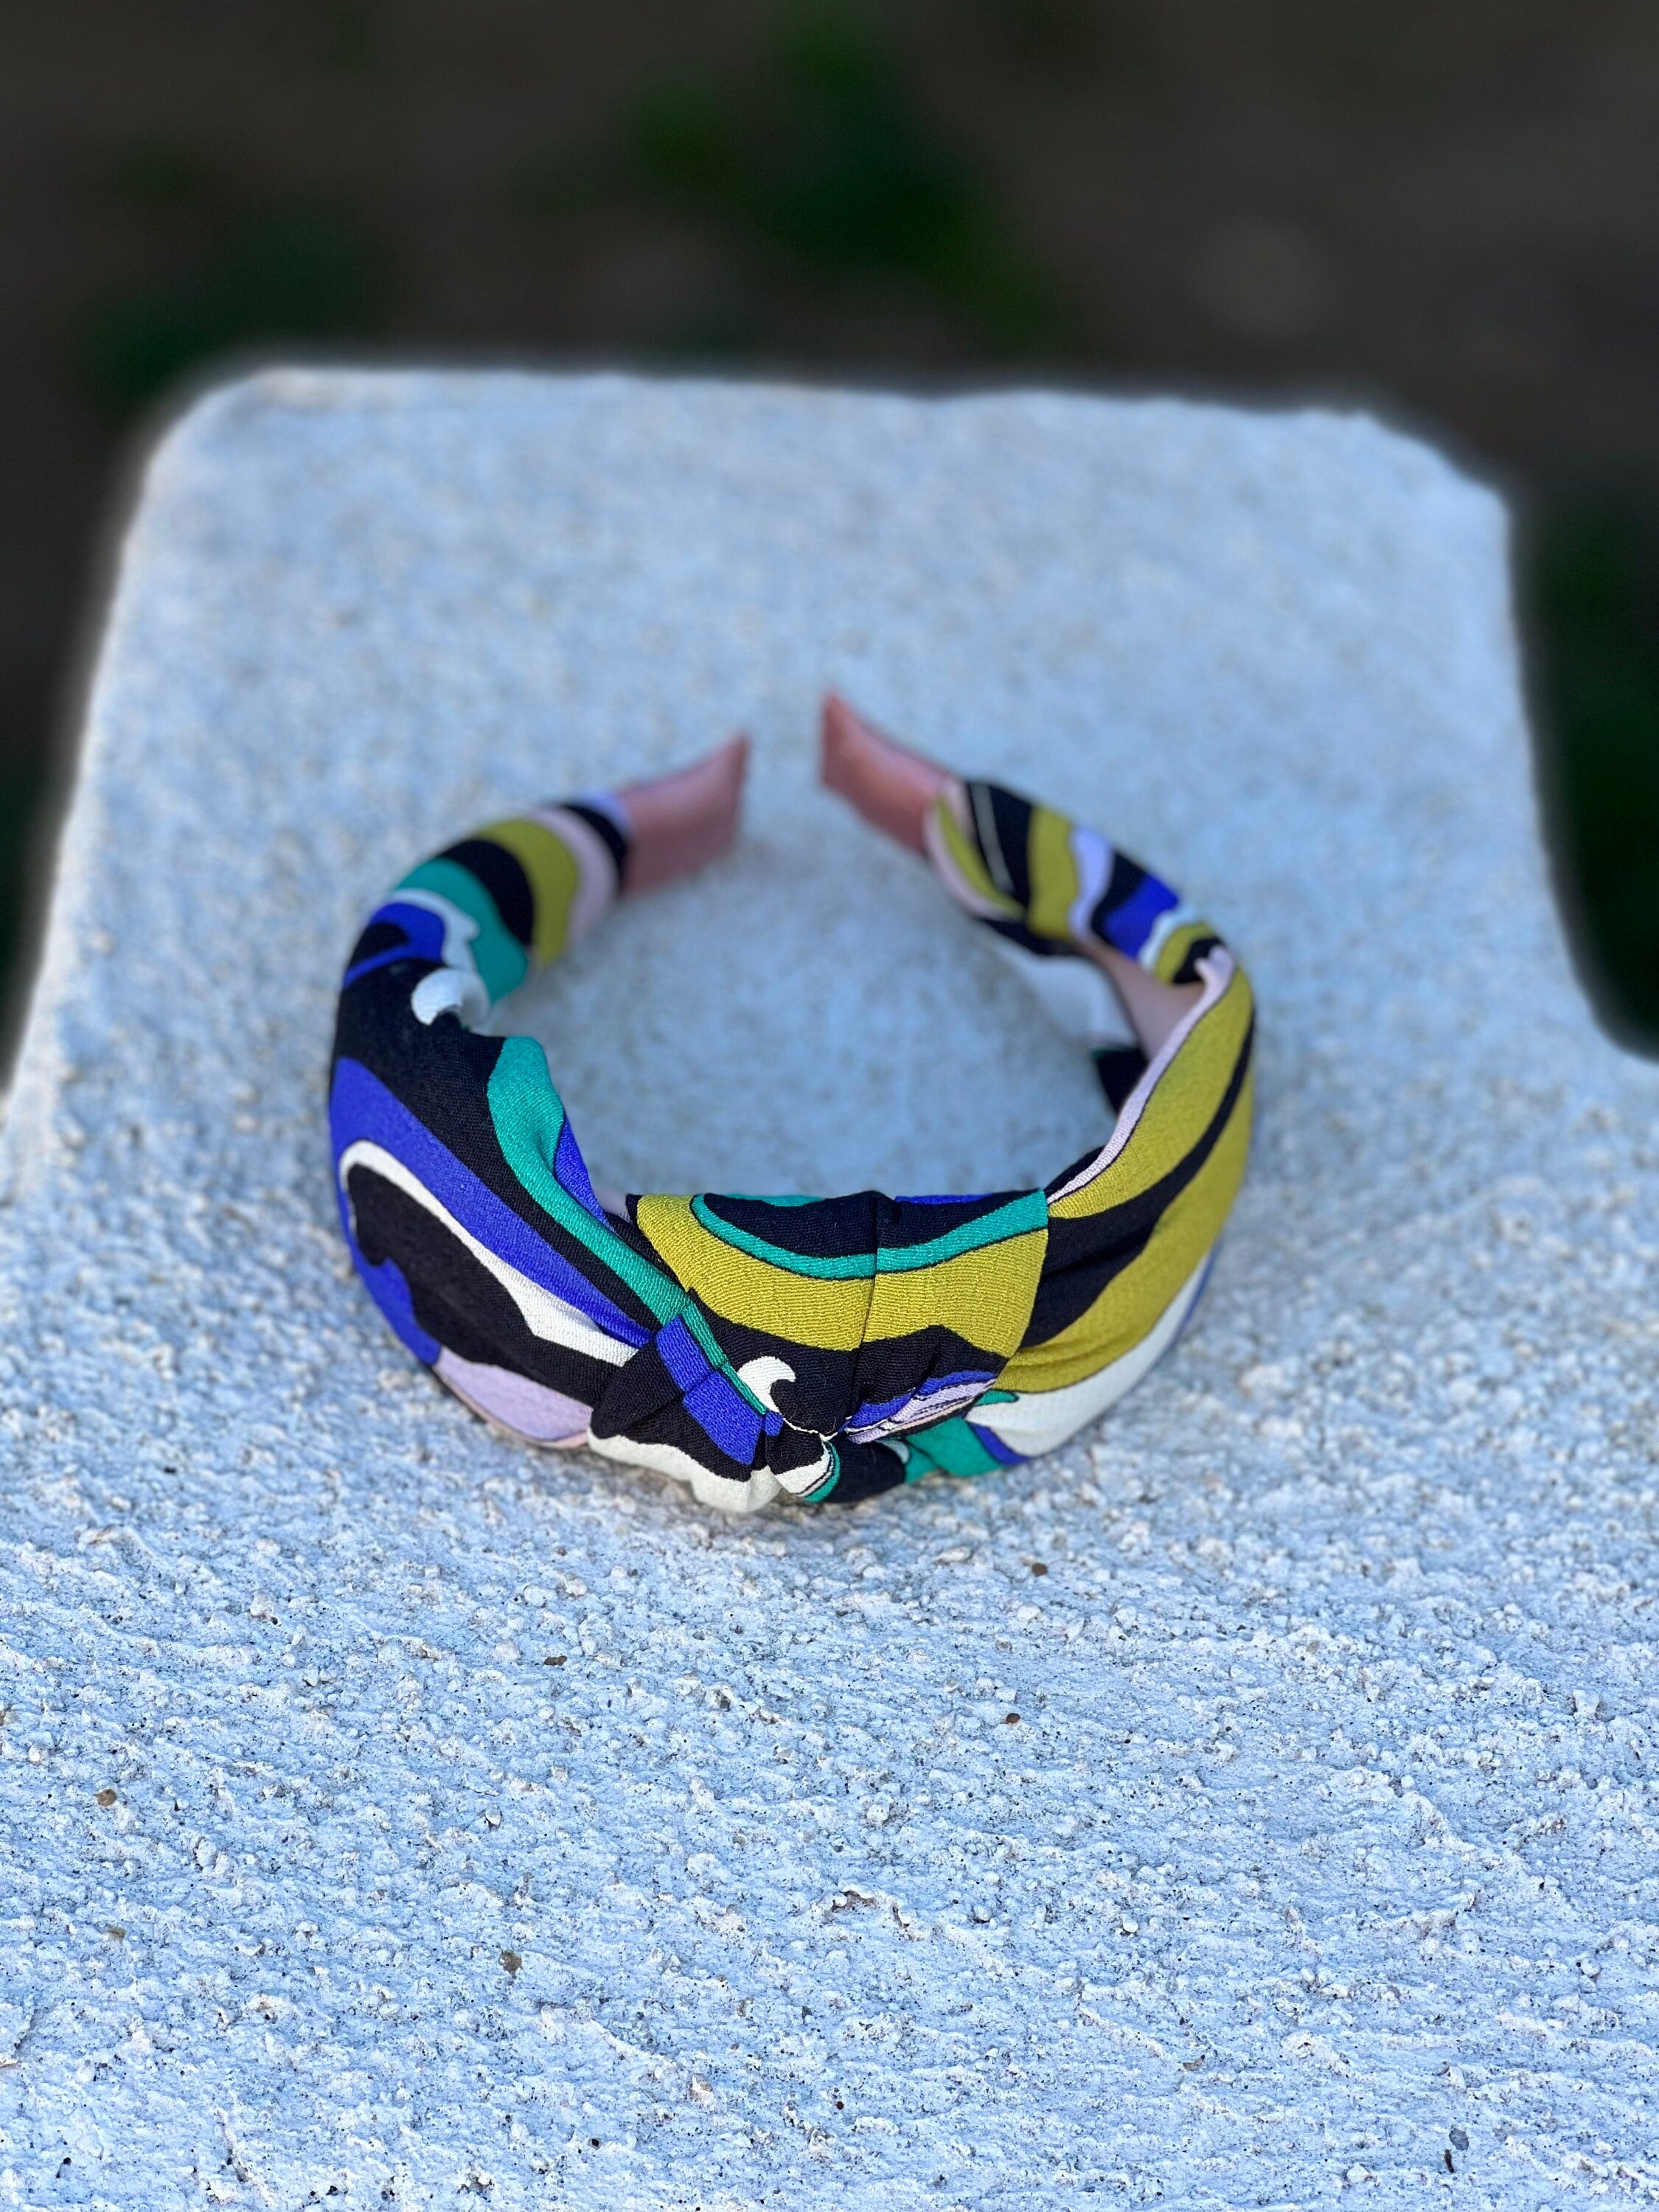 Make a fashion statement with our All-Season Headband. This hairband features a unique black, white, blue, and green color combination, perfect for any outfit.